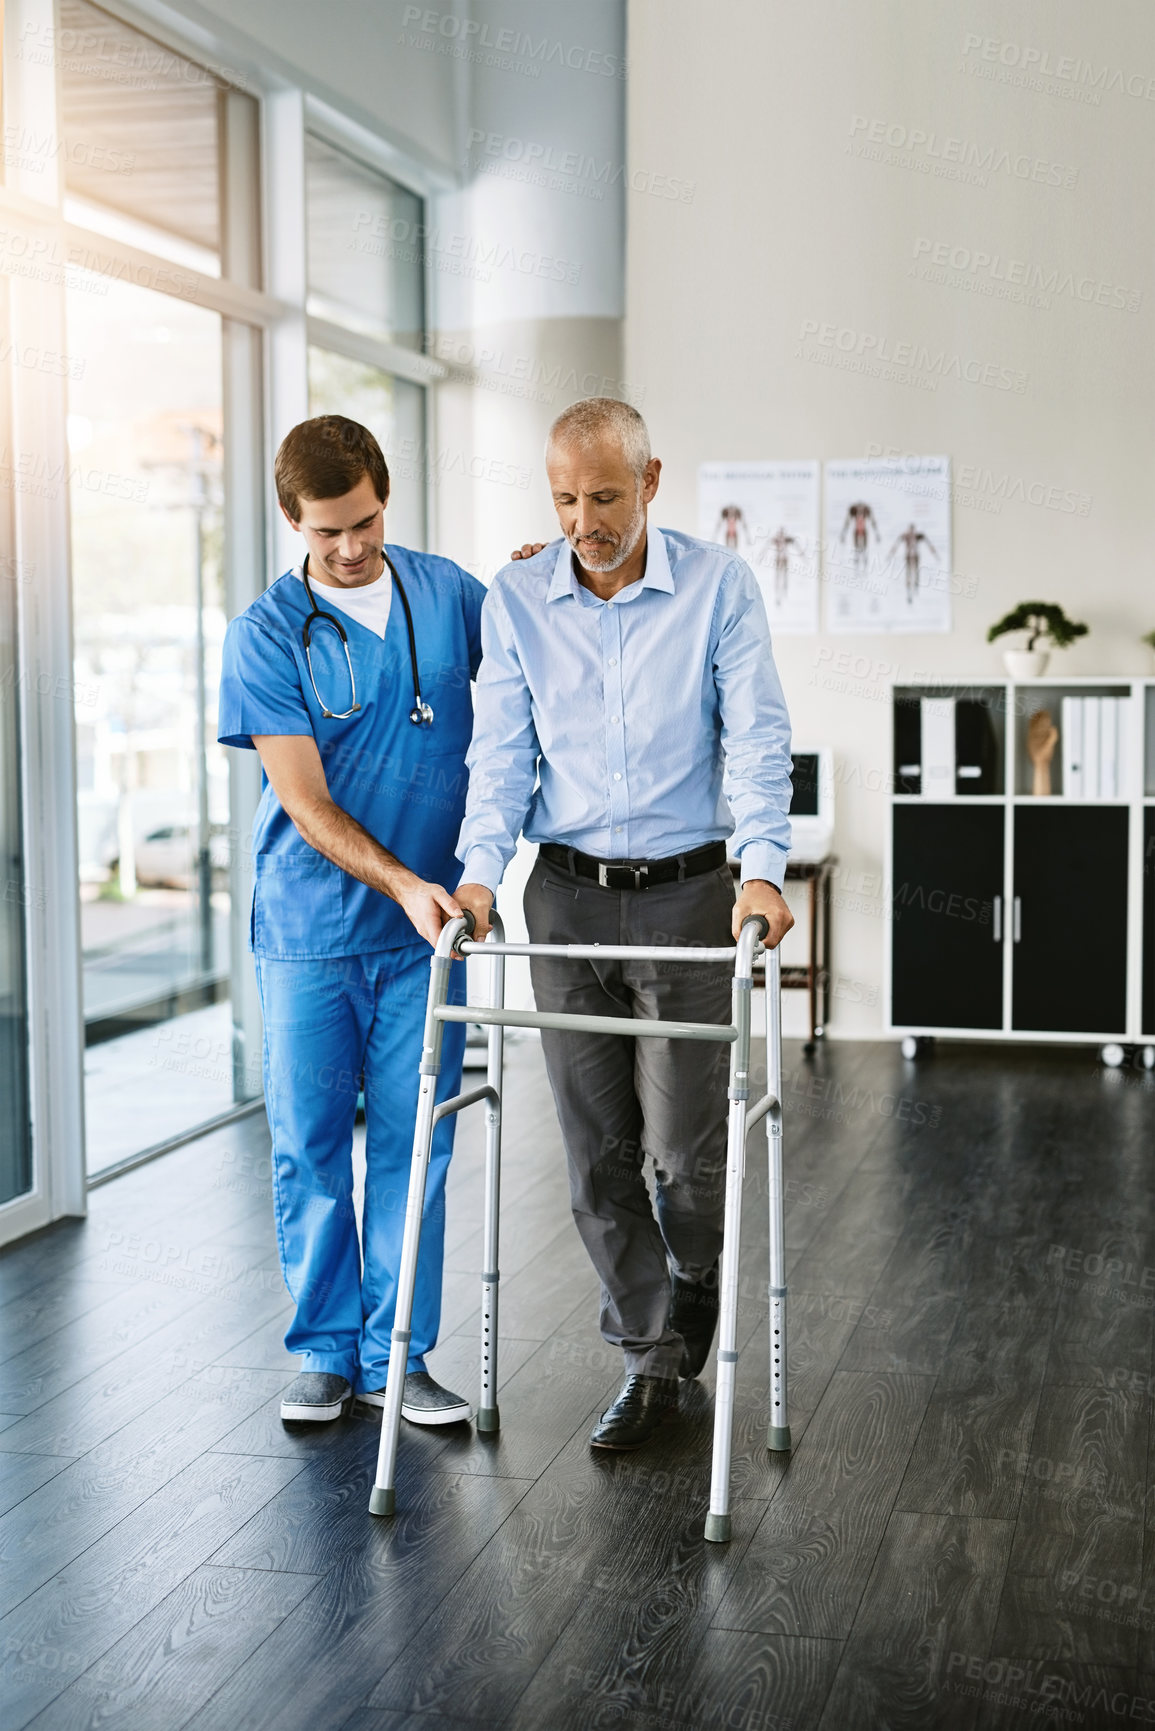 Buy stock photo Shot of a male nurse assisting a senior patient with a walker